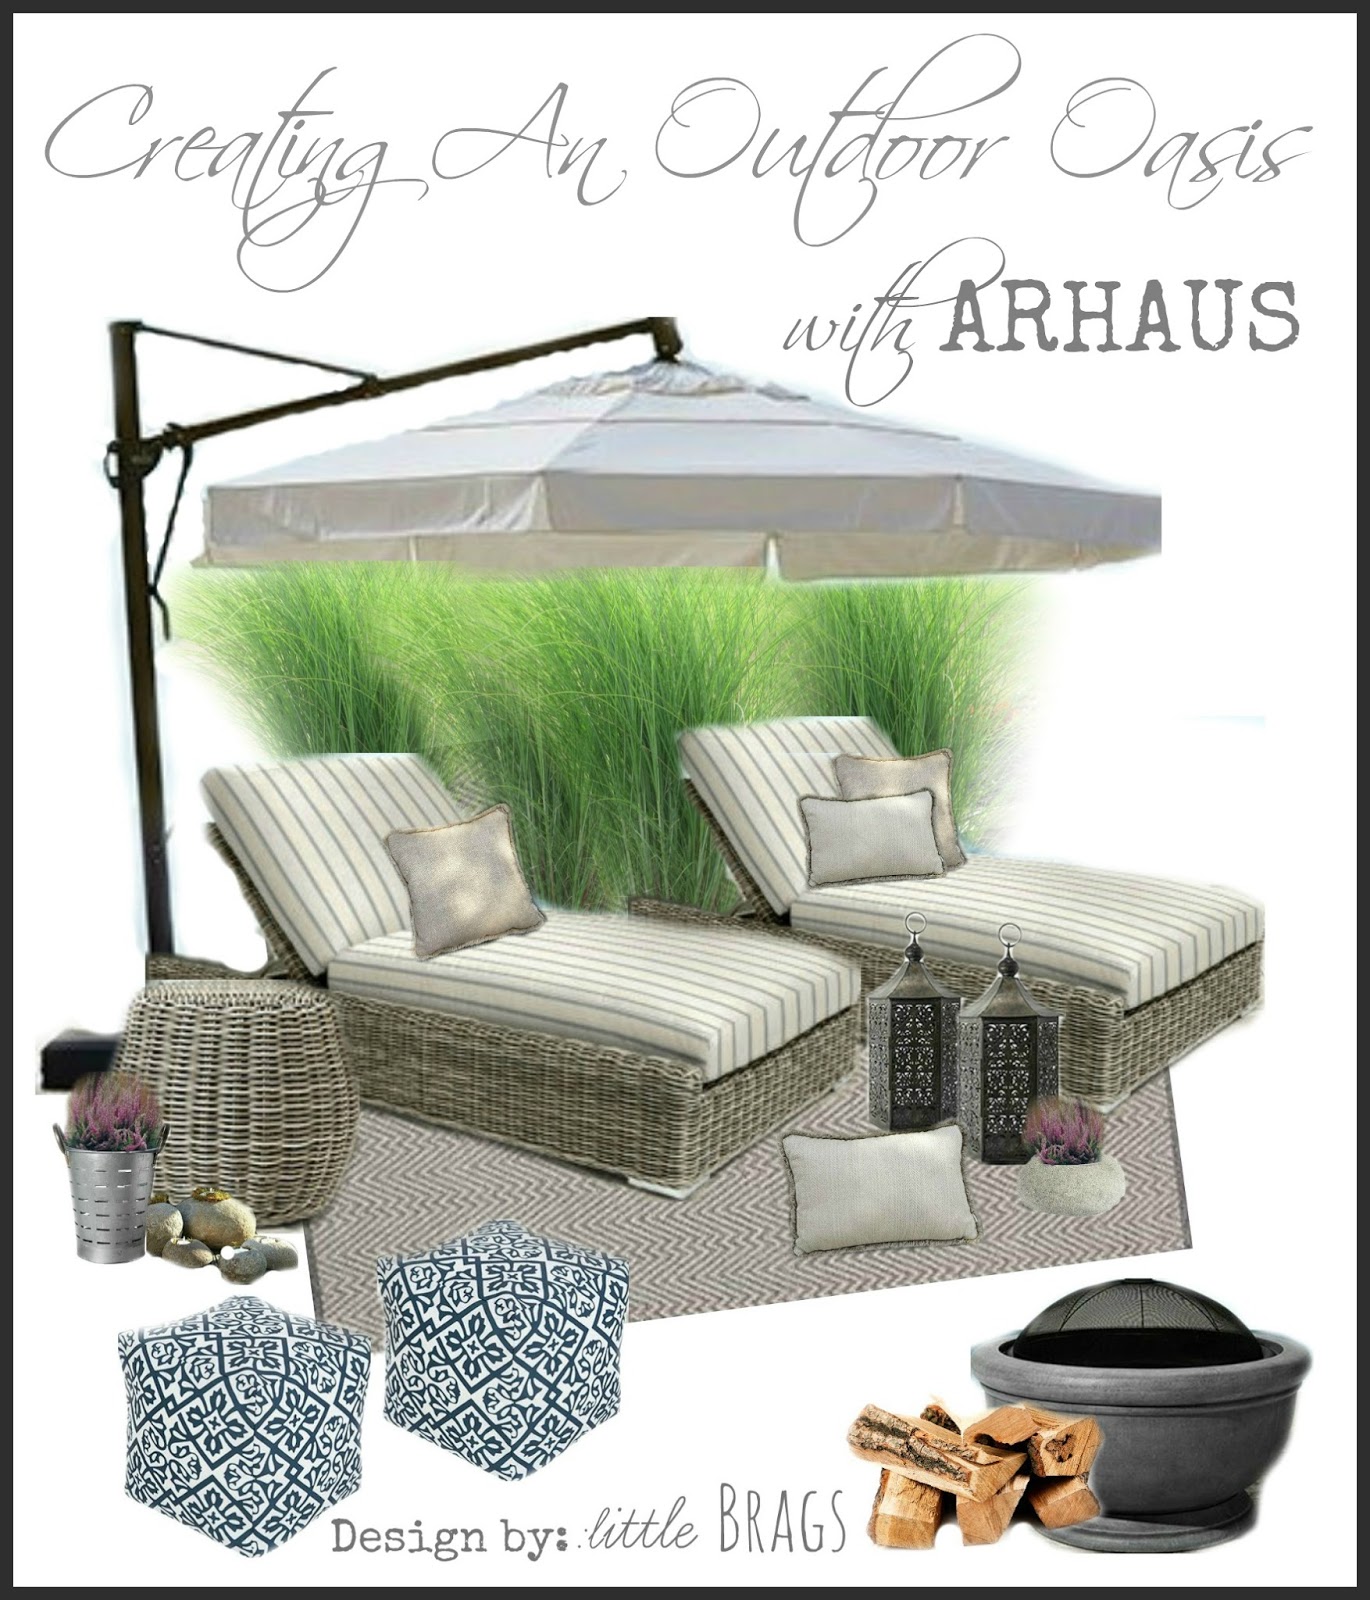 Little Brags Creating An Outdoor Oasis With Arhaus